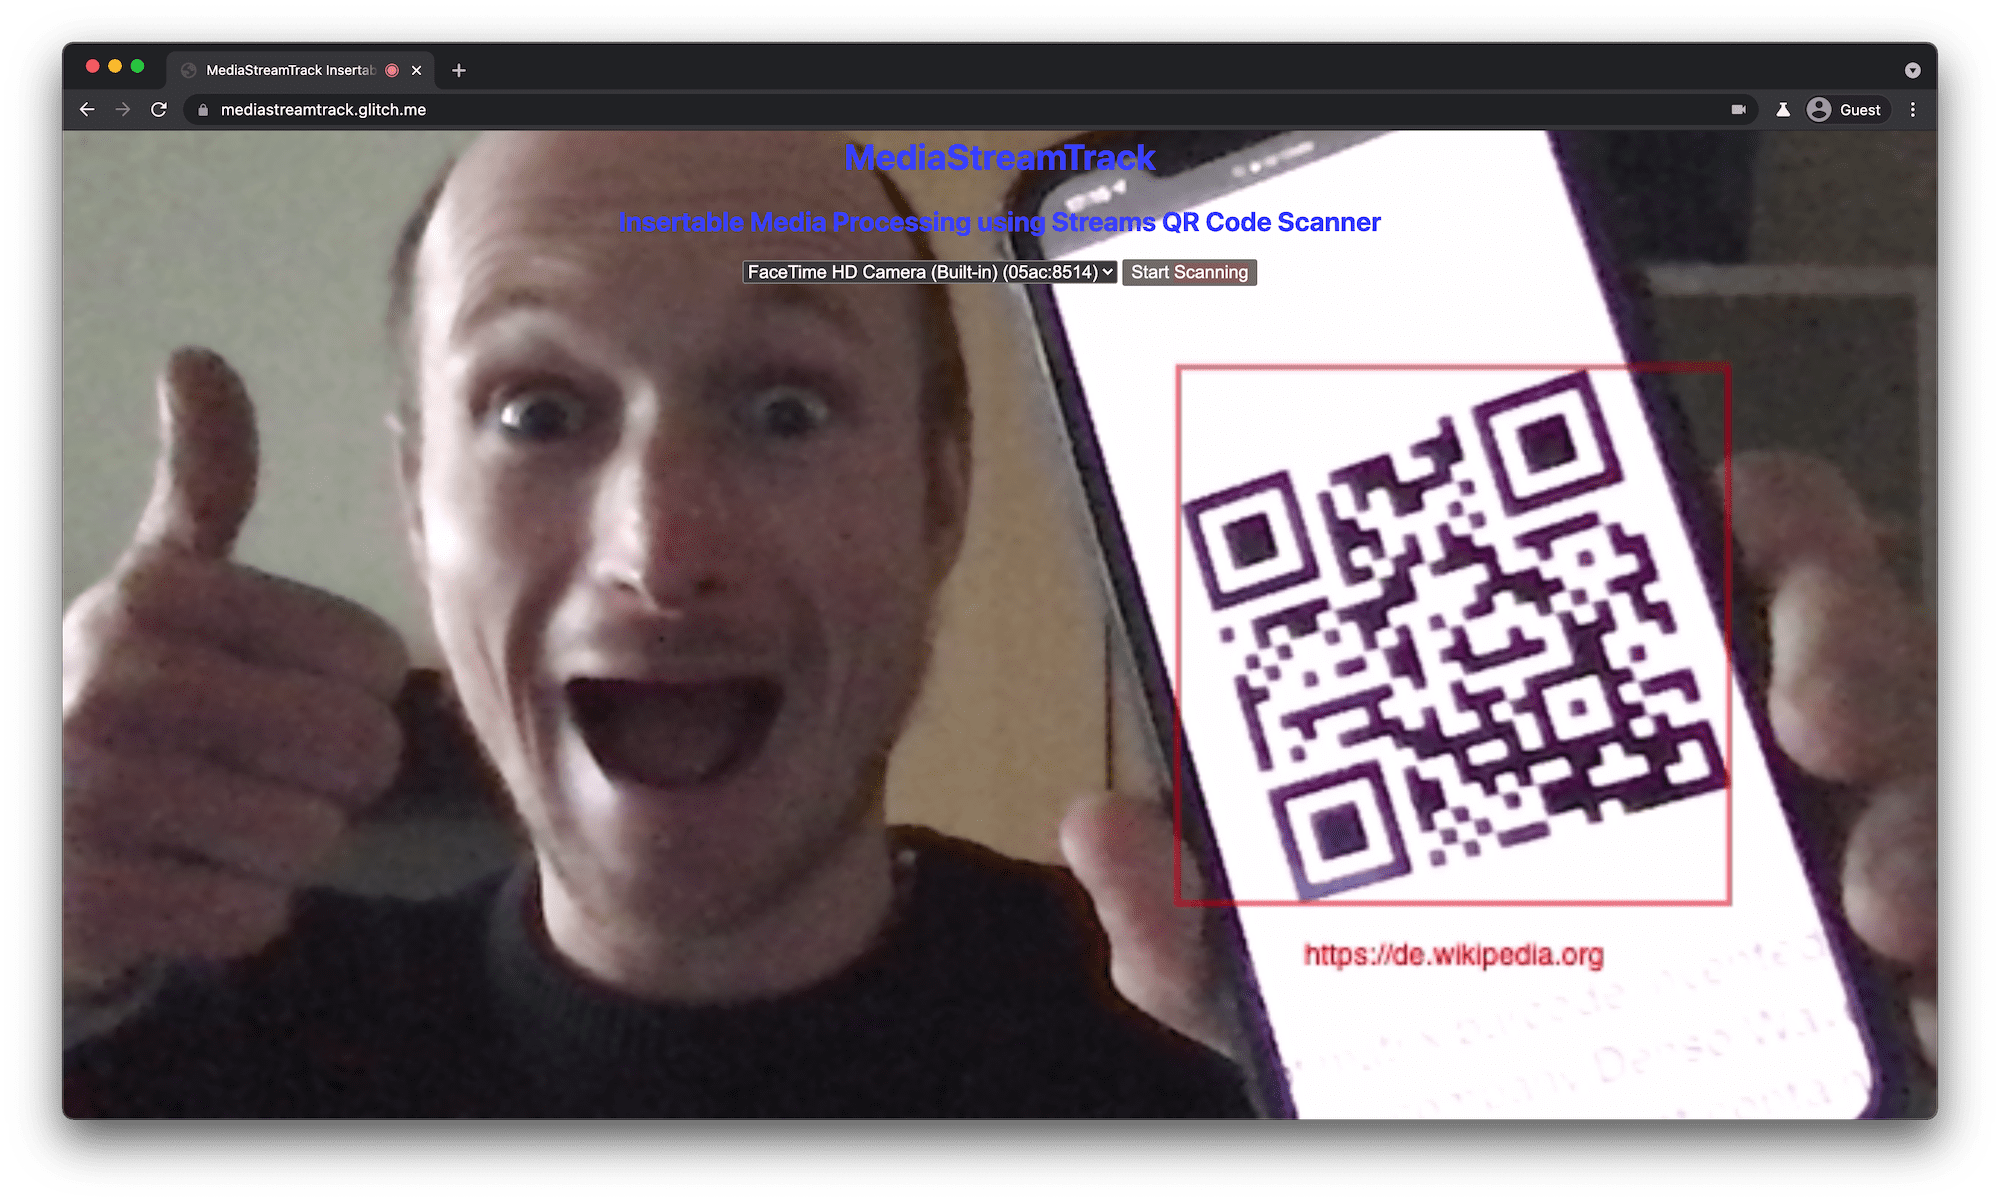 QR code scanner running in desktop browser tab showing a detected and highlighted QR code on the phone the user holds in front of the laptop's camera.